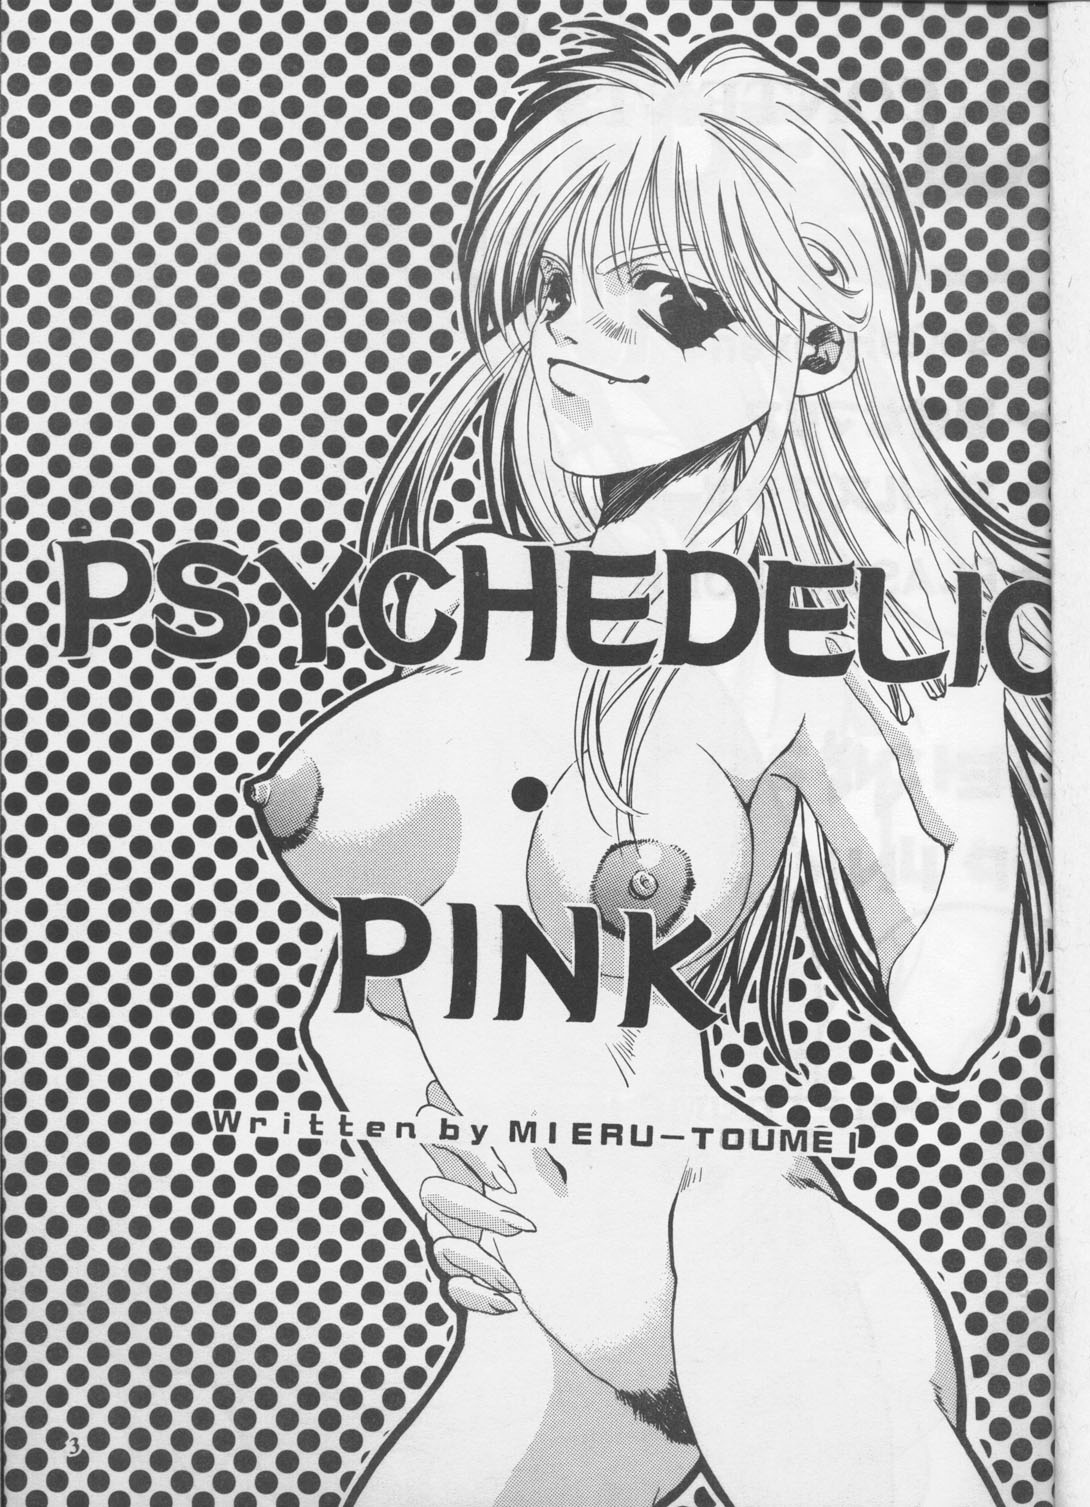 [Metal (Toumei Mieru)] PSYCHEDELIC PINK (Various) page 2 full